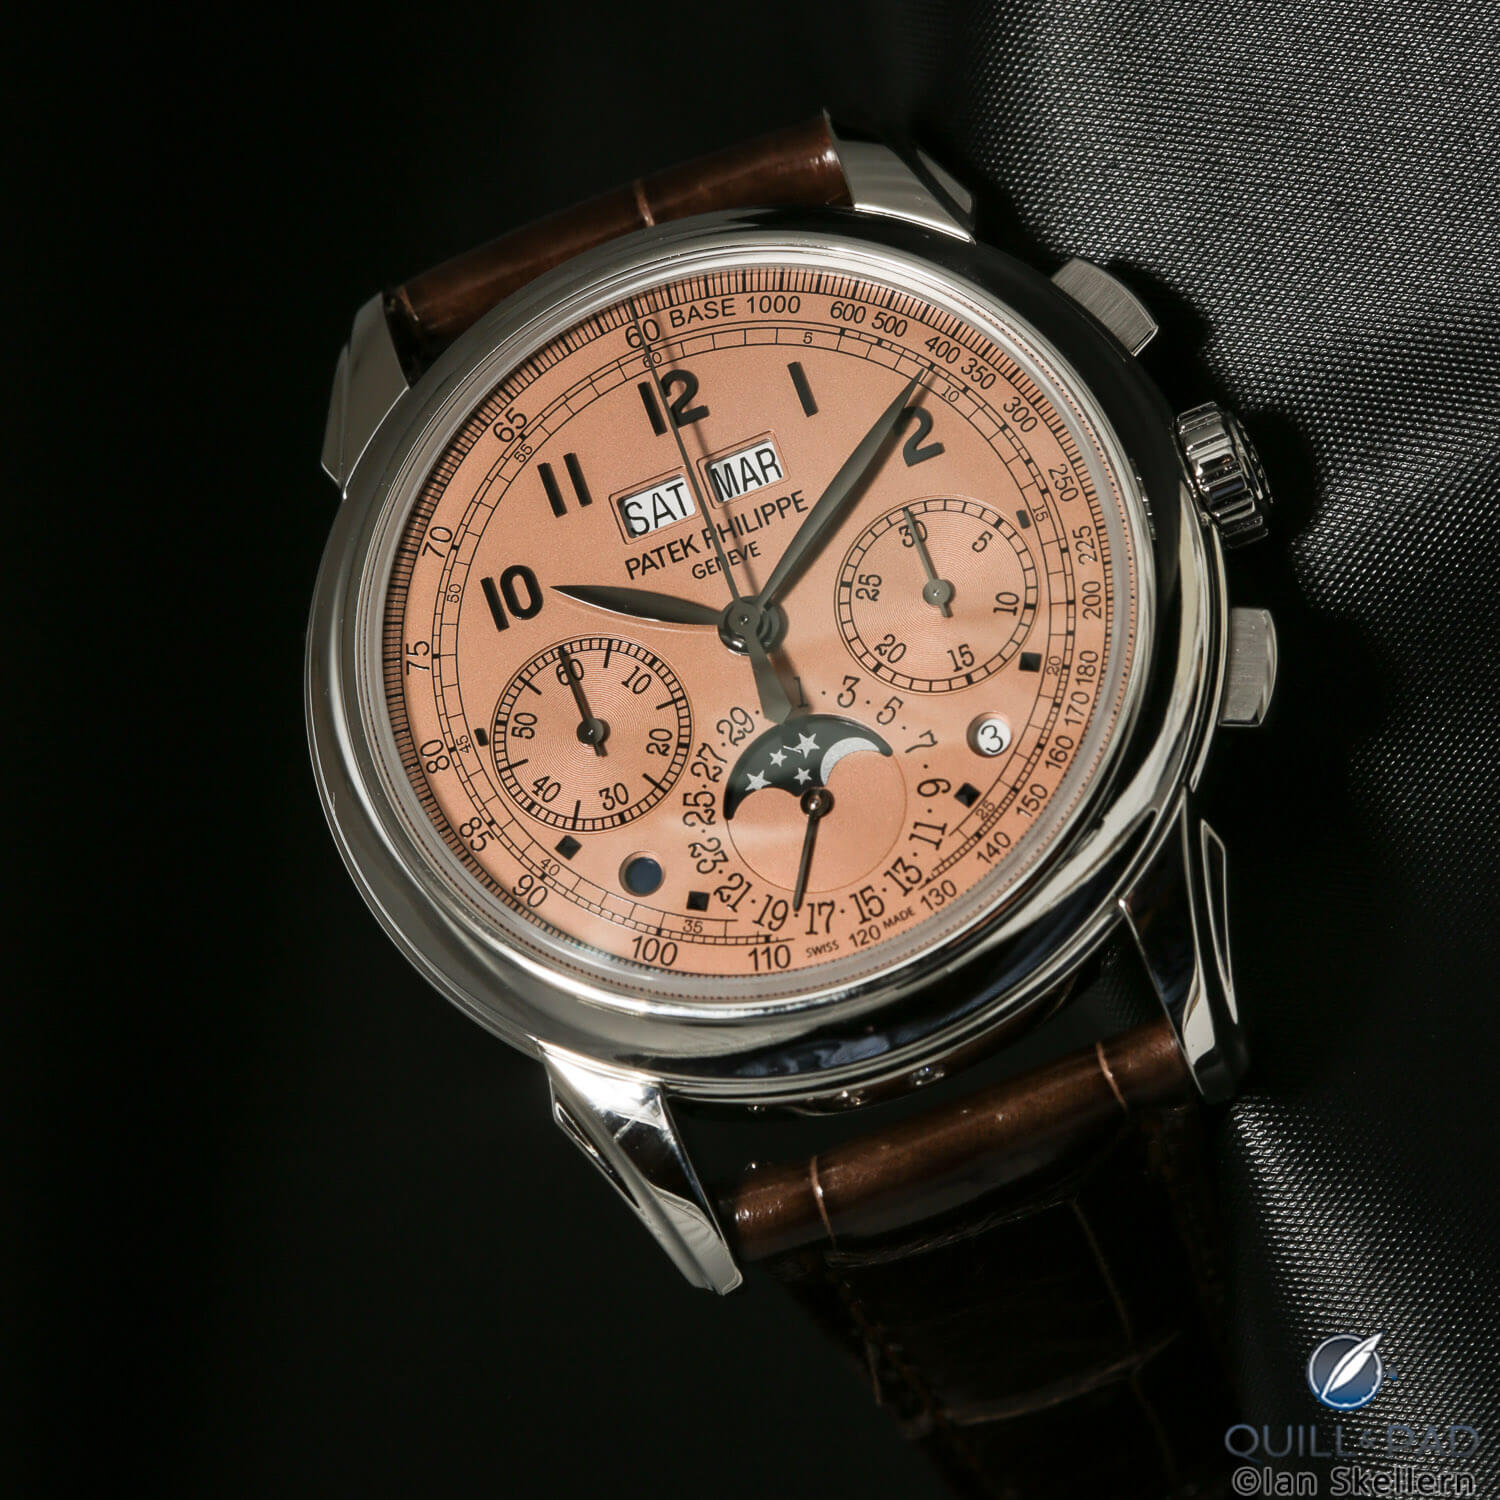 Patek Philippe Reference 5270P Perpetual Chronograph with salmon dial